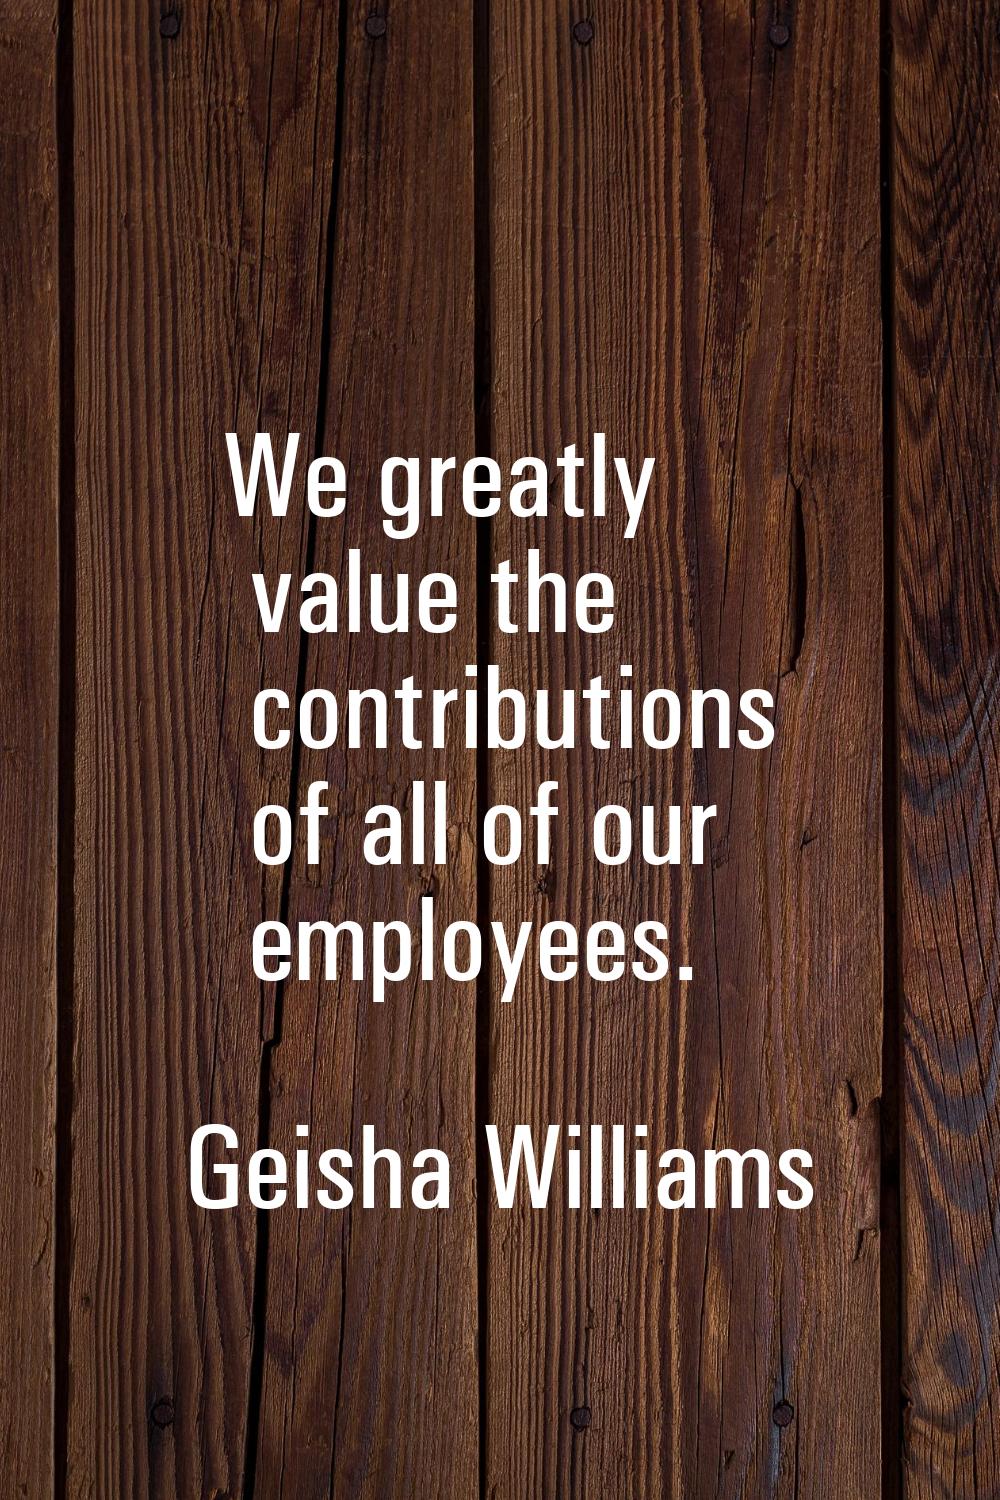 We greatly value the contributions of all of our employees.